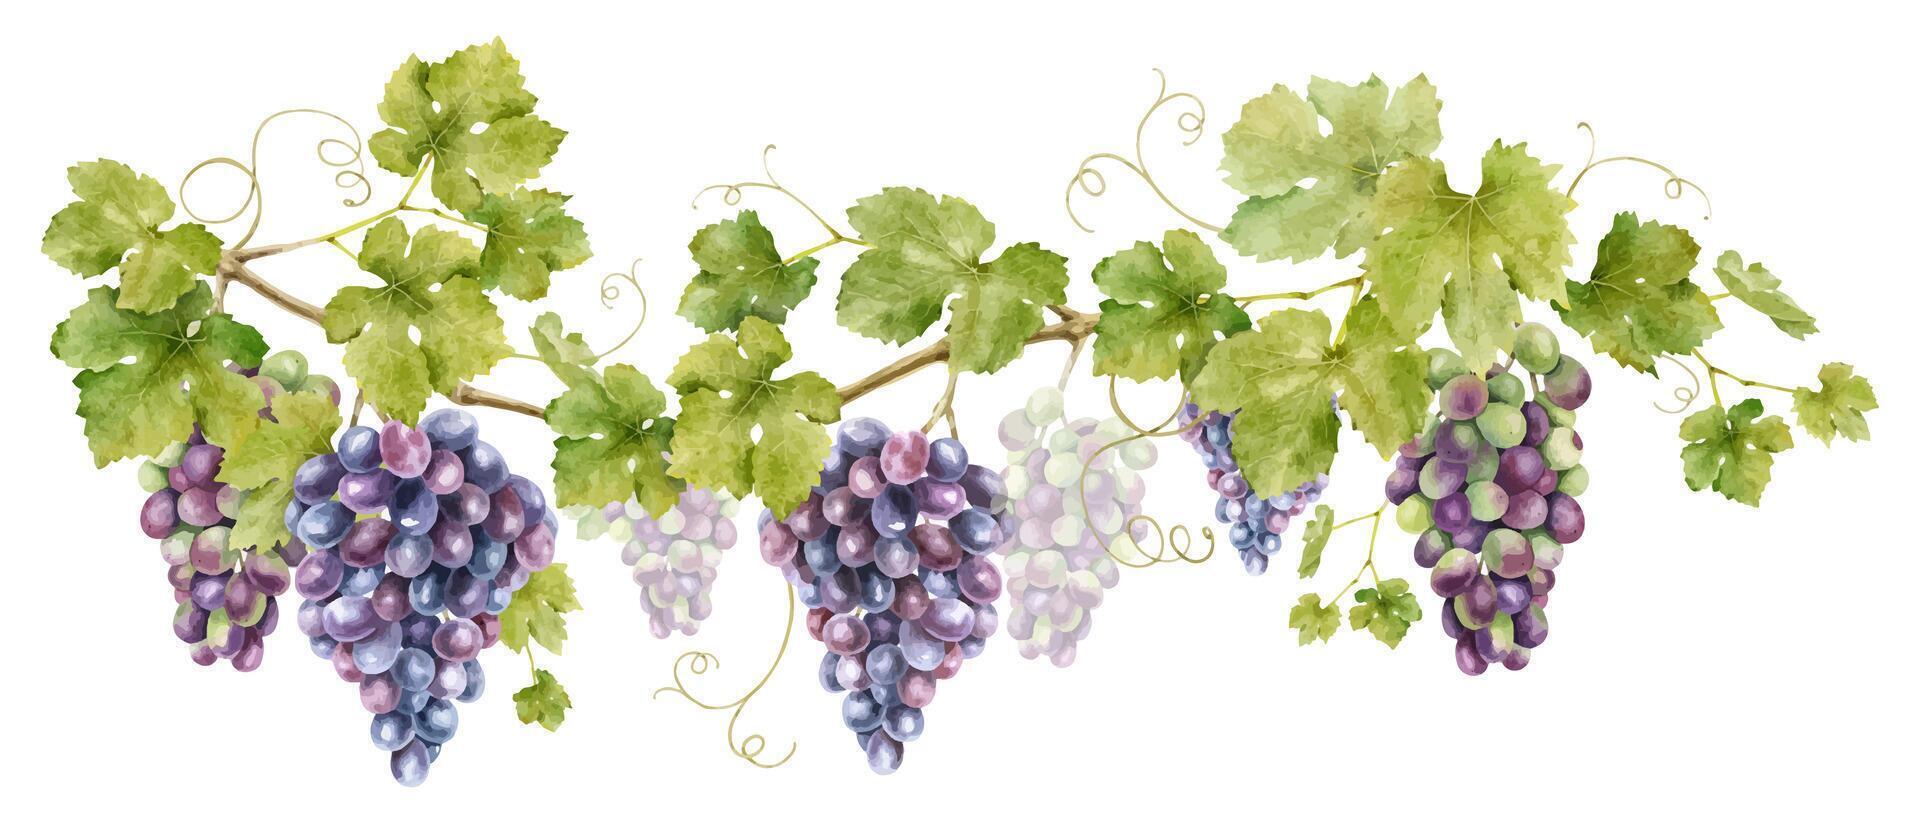 A bunch of grapes with leaves. Isolated watercolor illustration of Grape vine. For the design of labels of wine, grape juice and cosmetics, wedding cards, stationery, greetings, wallpaper, invitations vector